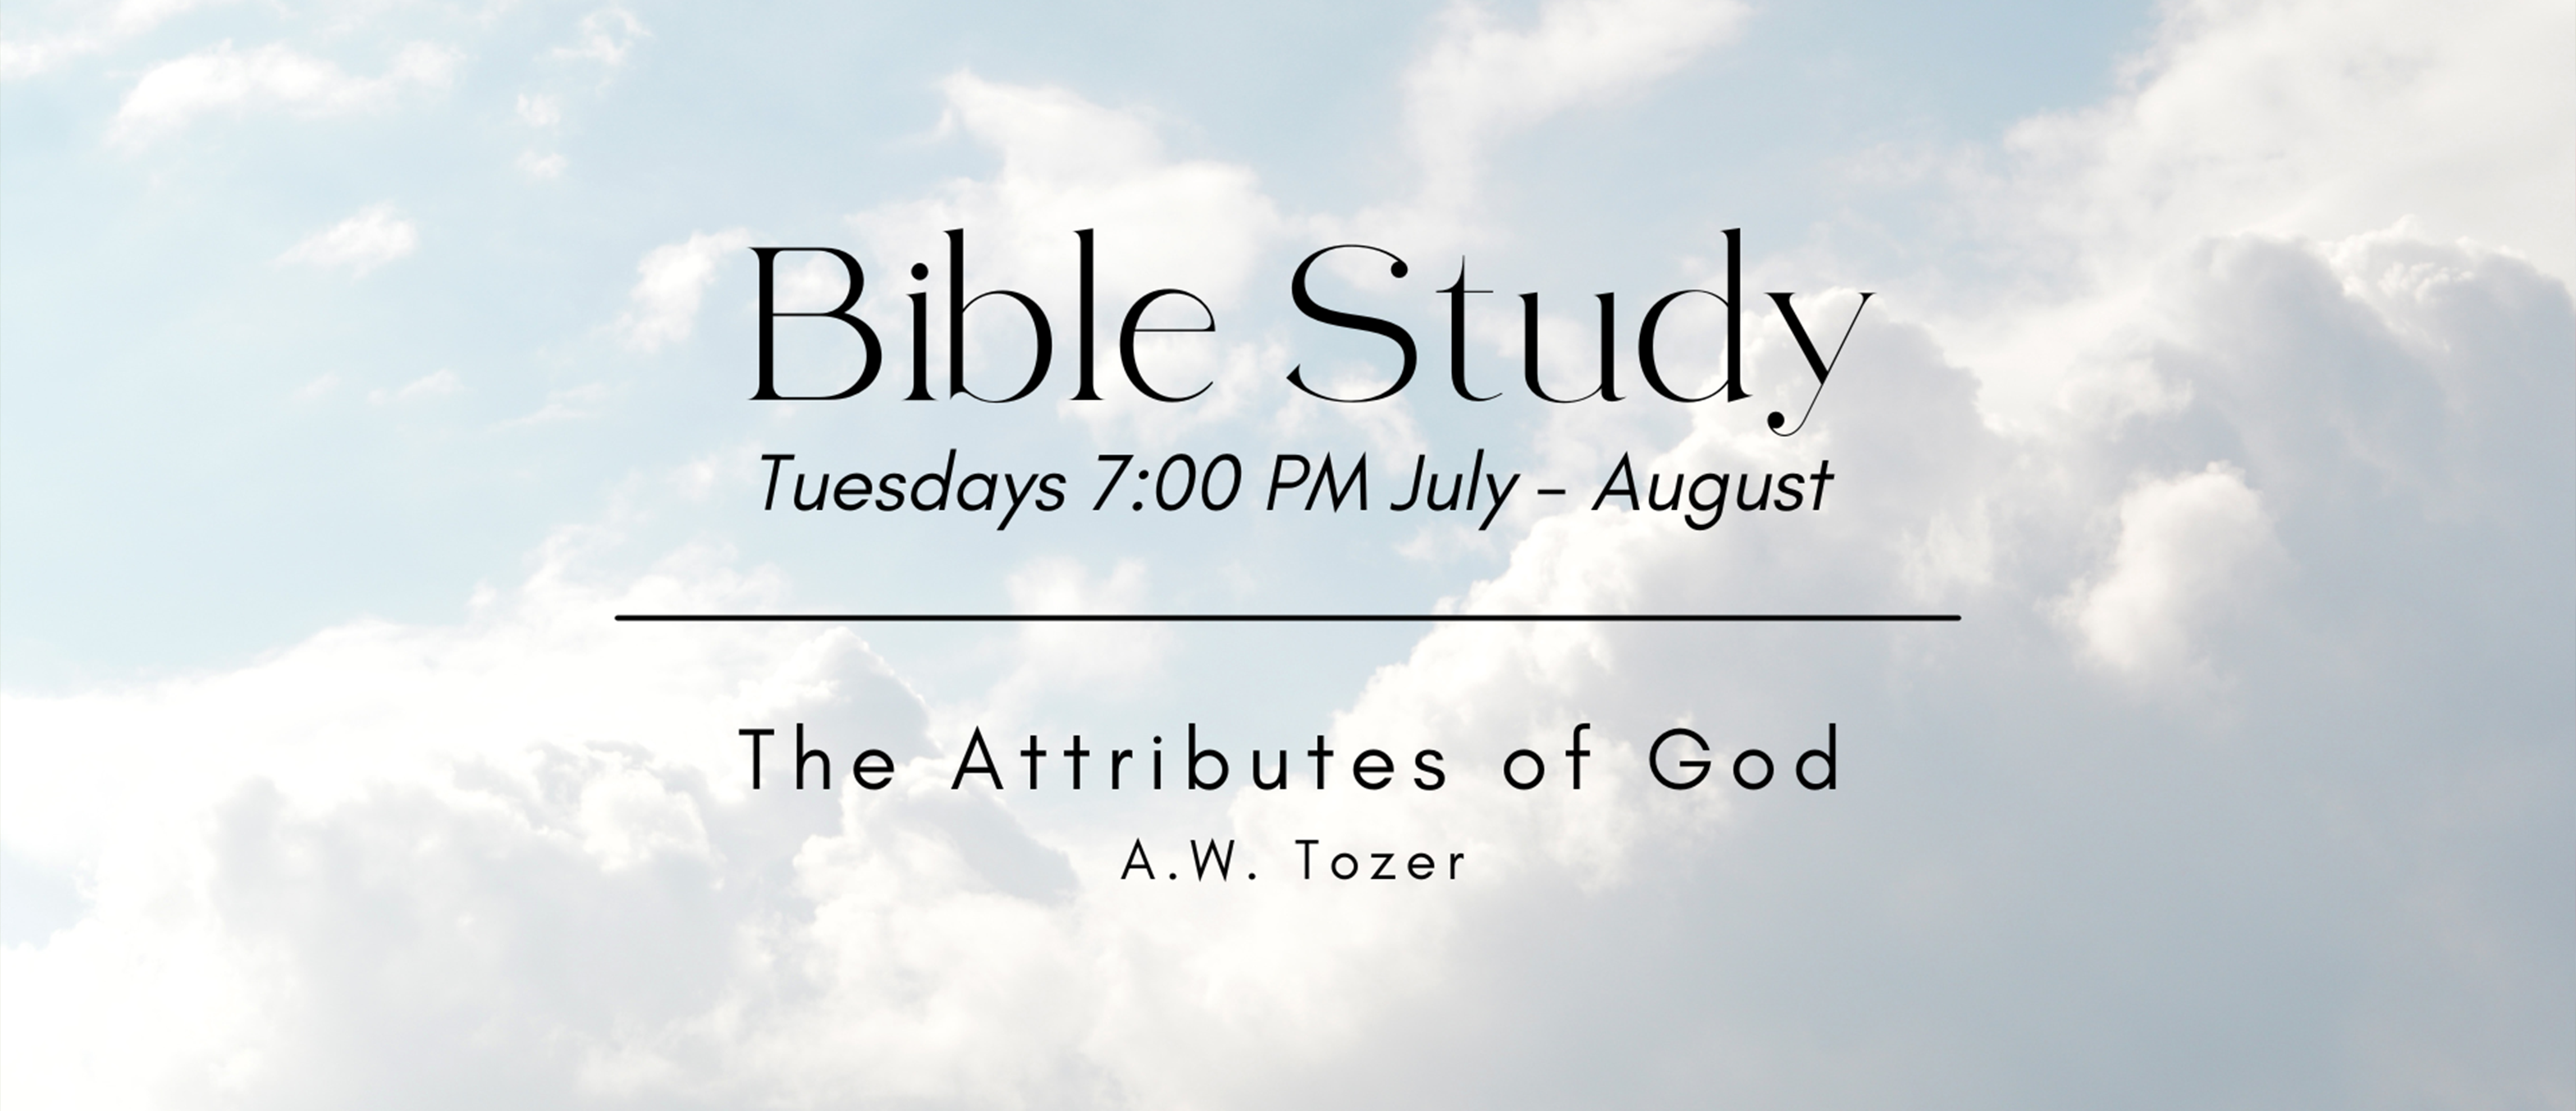 Attributes of God Summer Bible Study